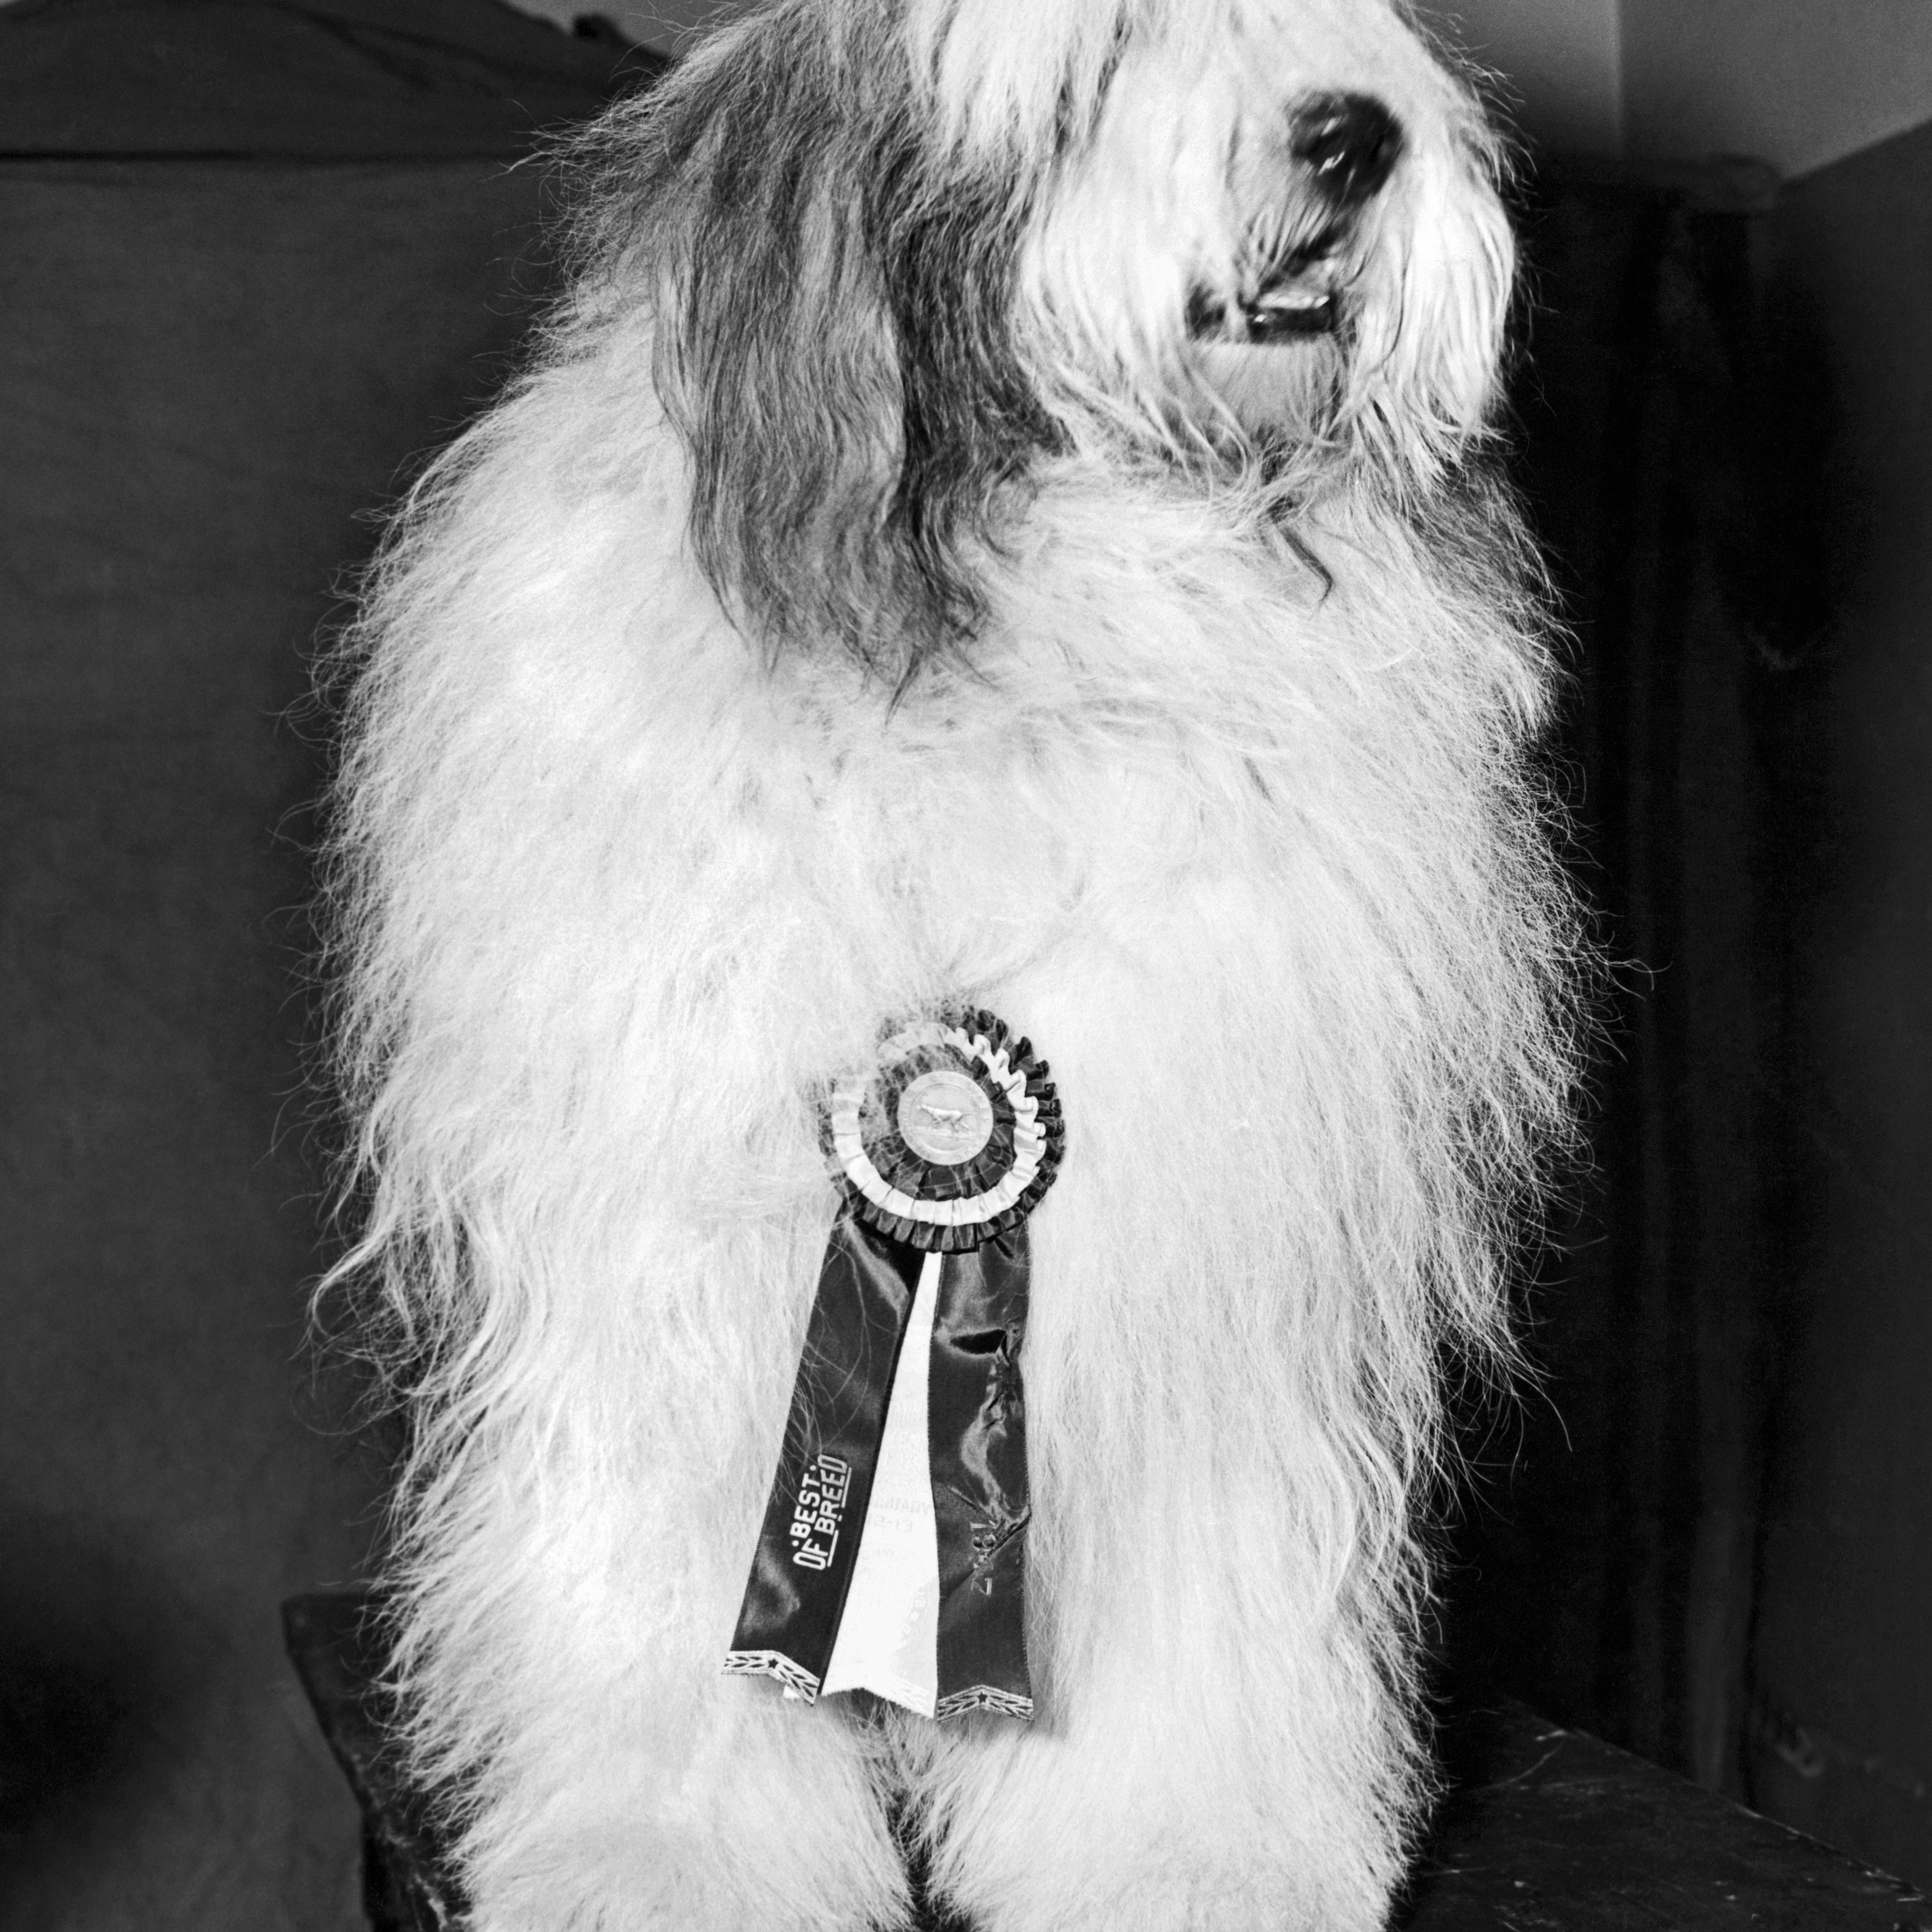 The winner of 'best of breed' in the Old English sheepdog class at the Westminster Kennel Club event in Madison Square Garden, New York, February 1947.